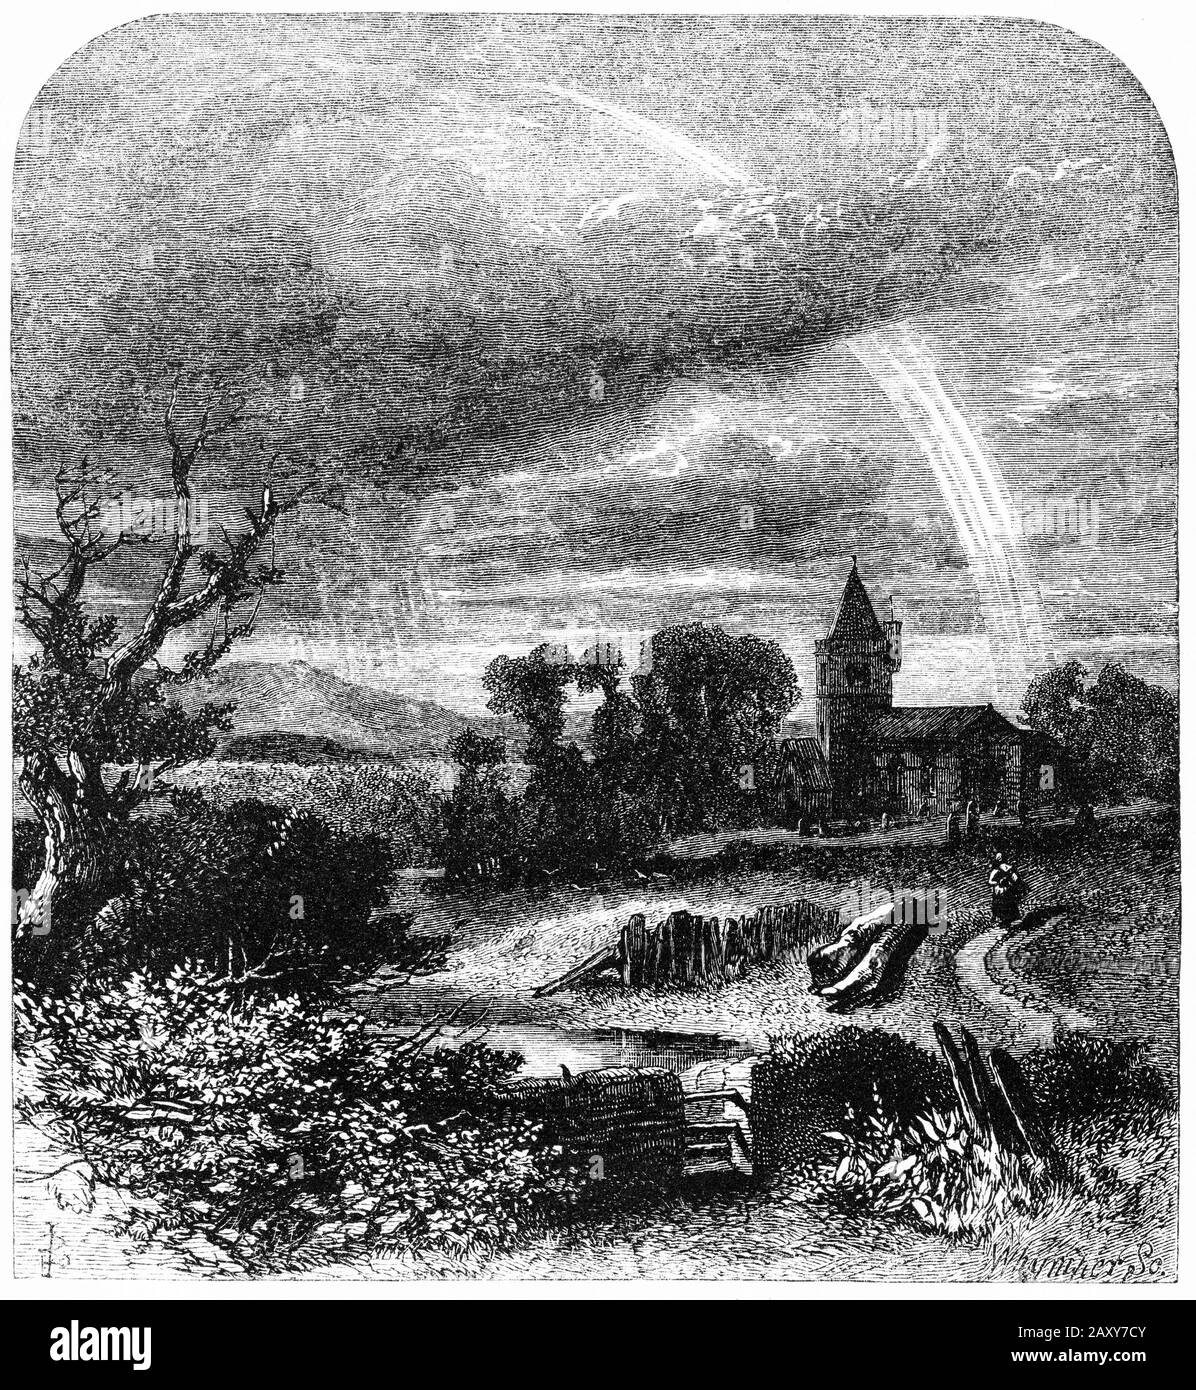 Engraving of a rainbow after the rain over an English setting Stock Photo